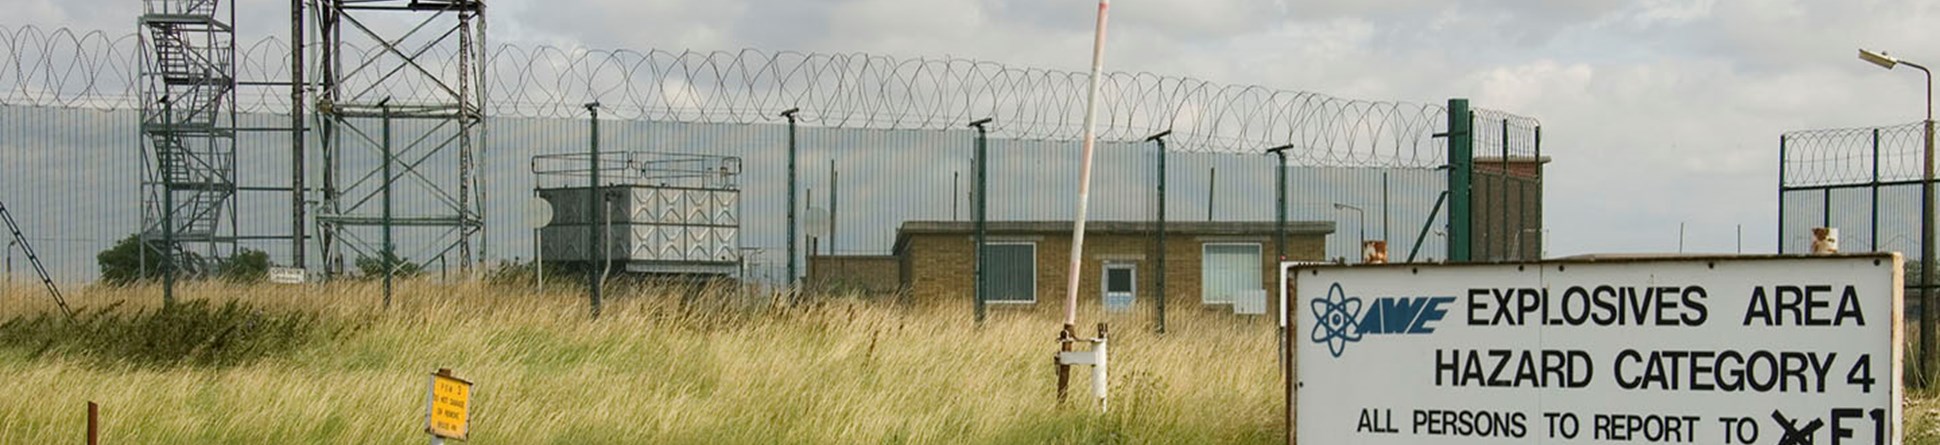 Atomic Weapons Establishment, Foulness, Essex, explosives area warning sign and security fence.